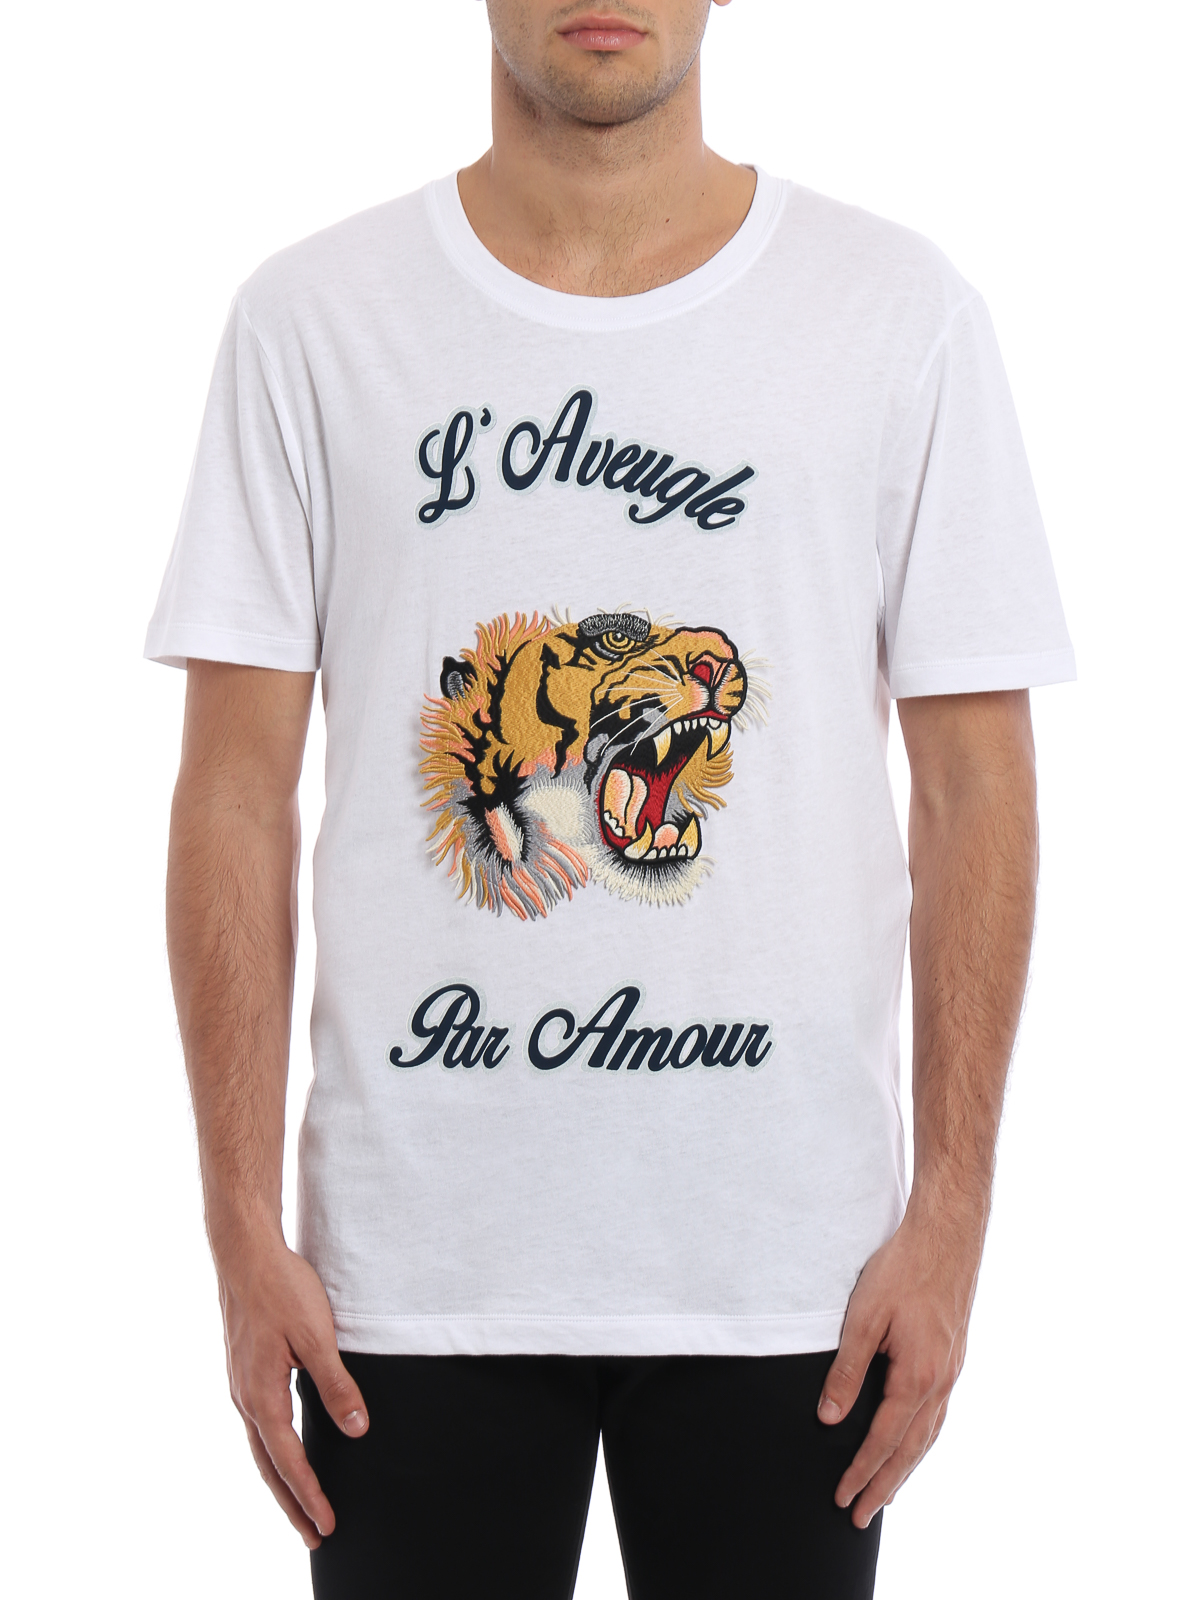 embroidered tiger shirt